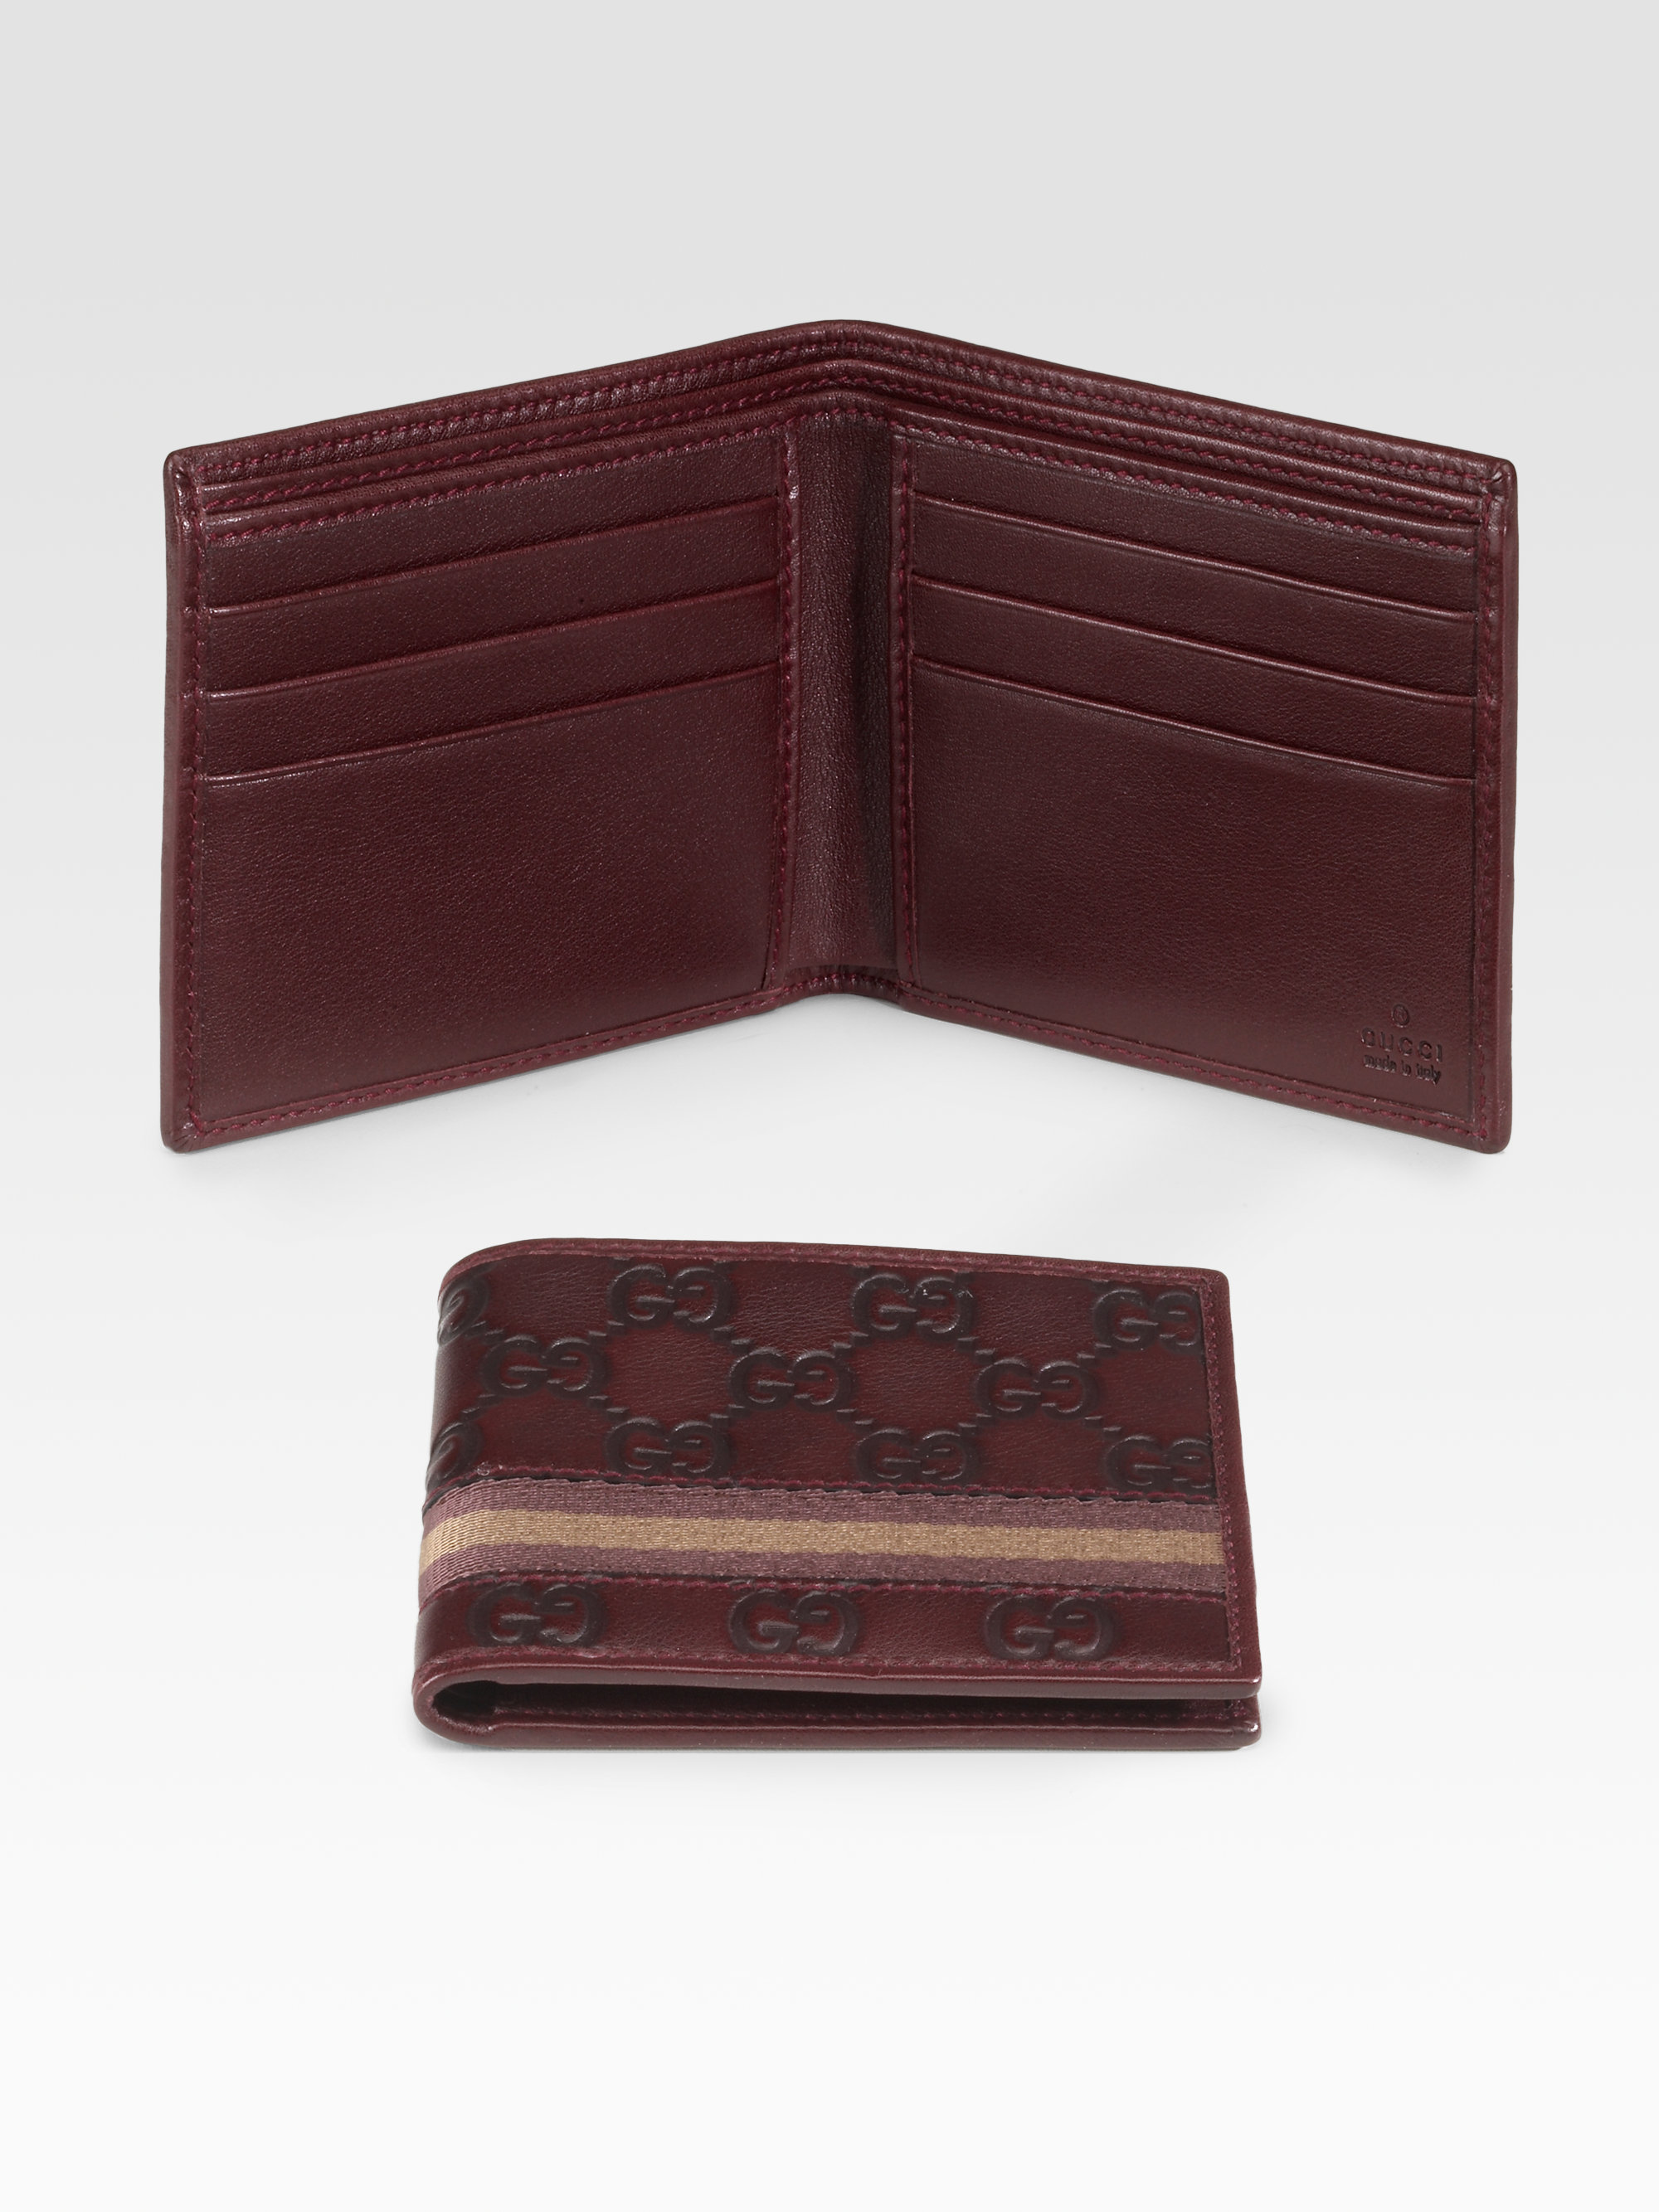 Red Gucci Wallets | IUCN Water